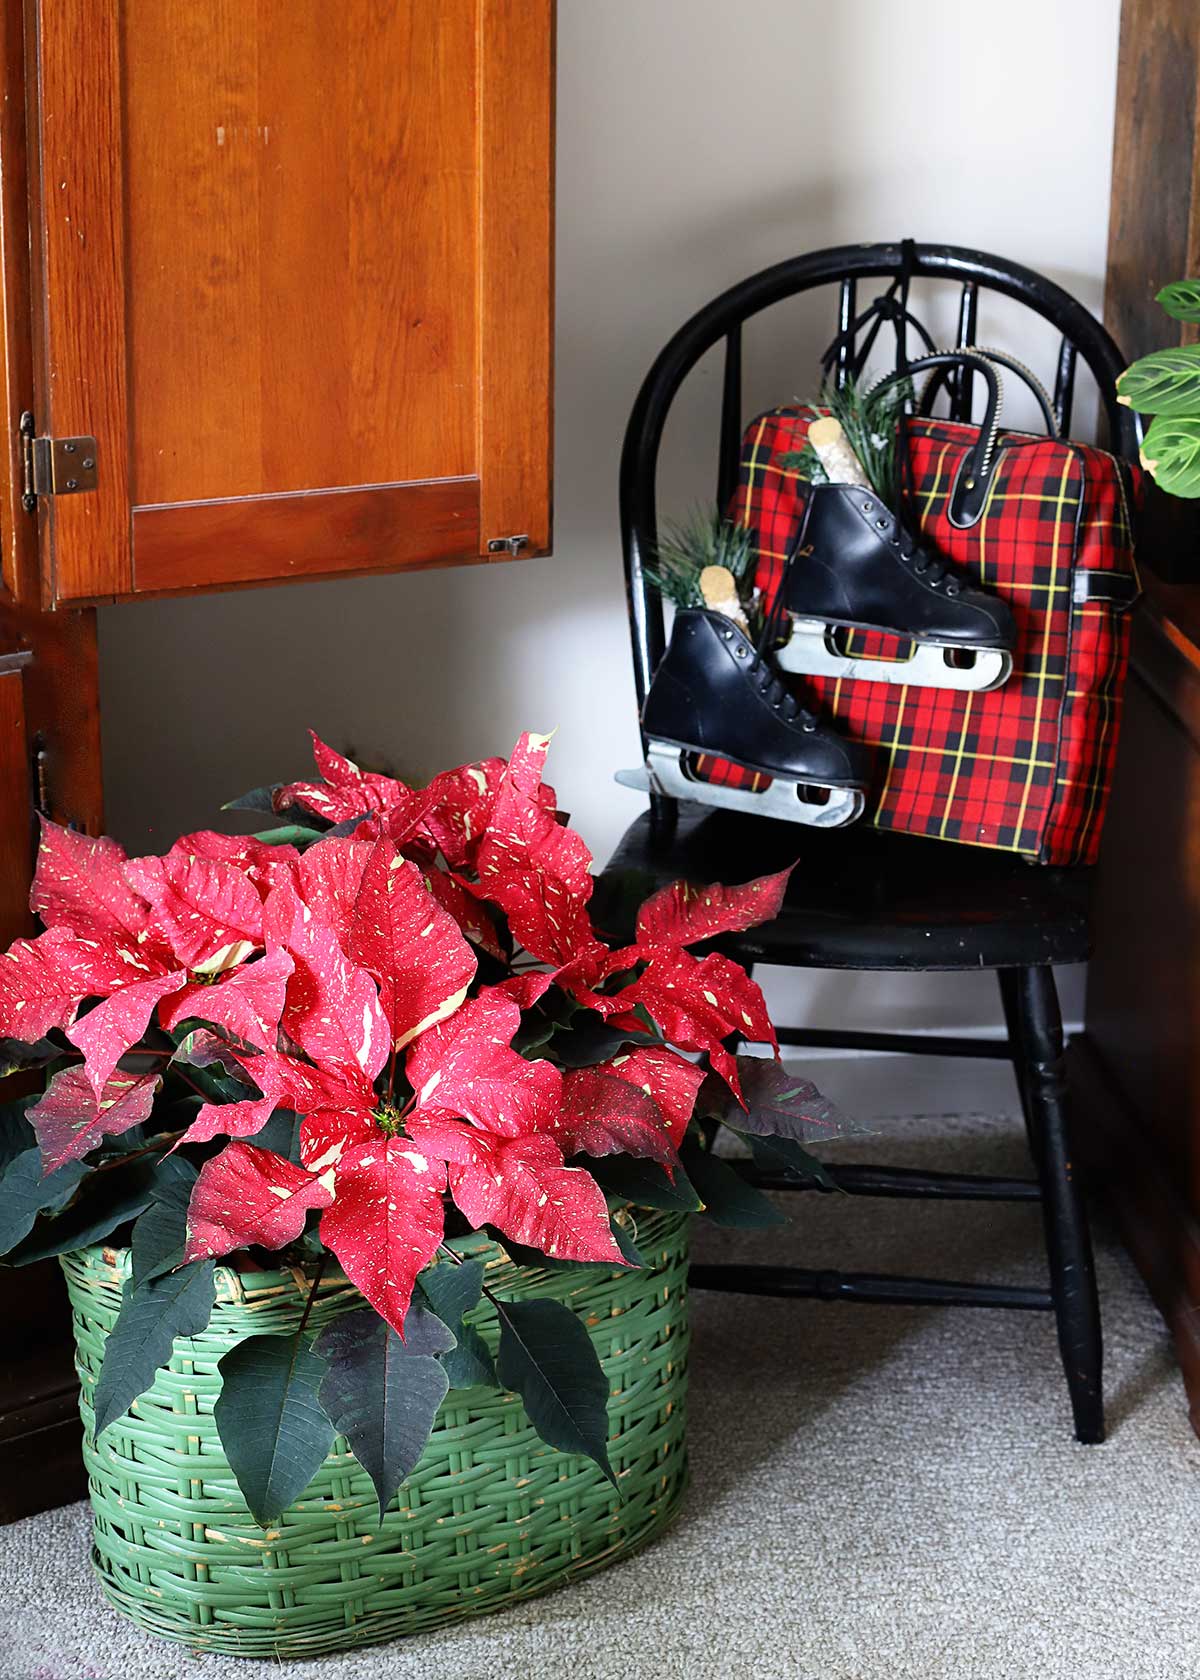 red poinsettia in a green basket and ice skates hanging on a chair